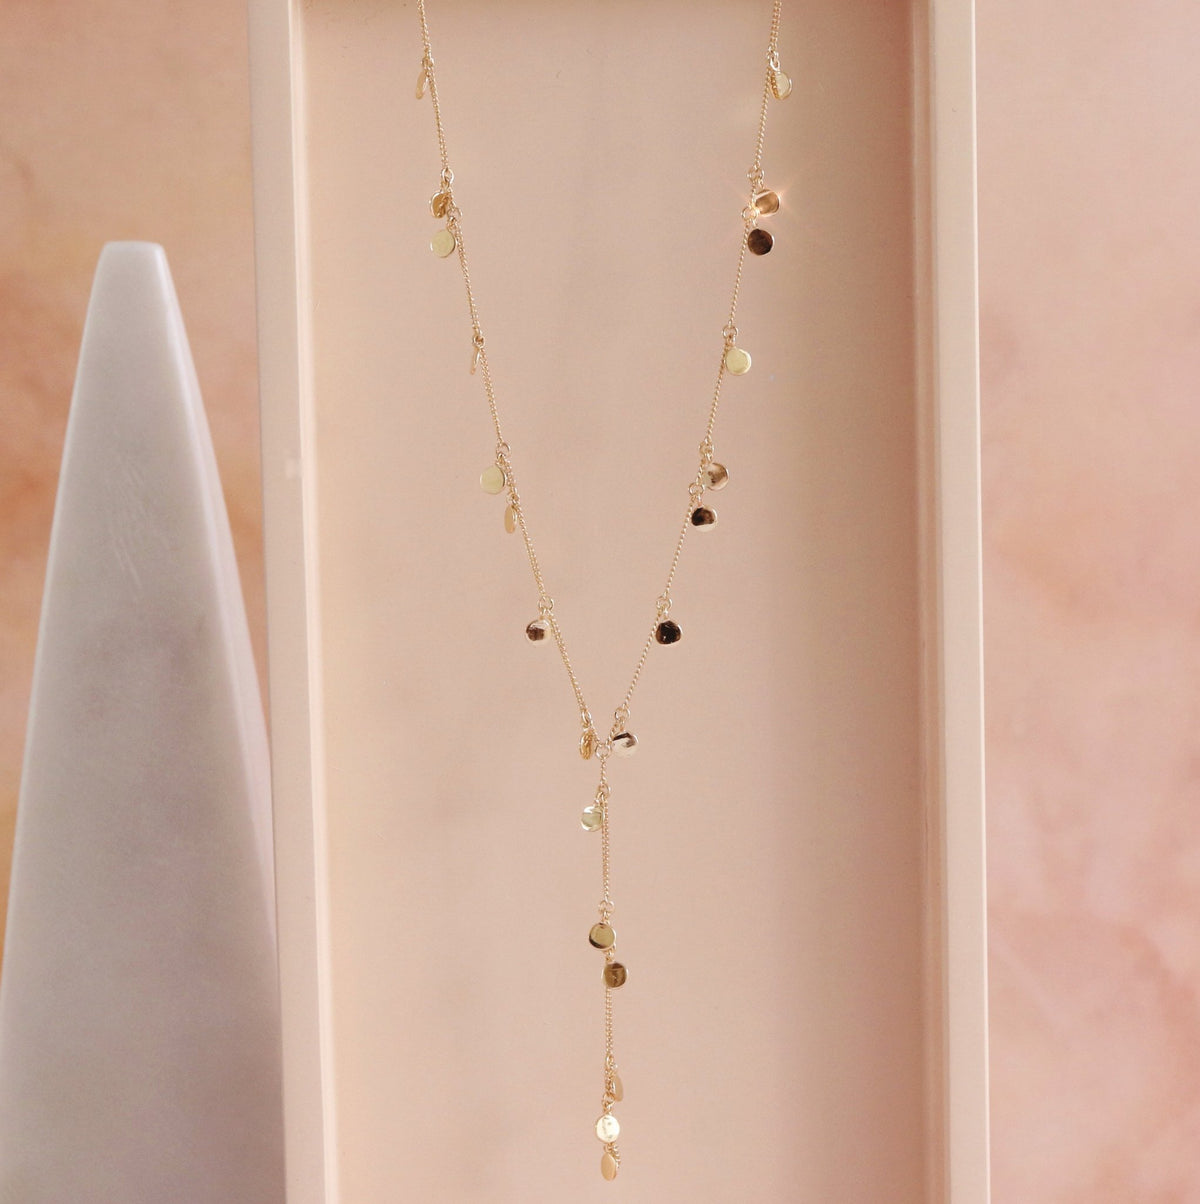 DAINTY POISE DISK Y NECKLACE - GOLD, ROSE GOLD OR SILVER - SO PRETTY CARA COTTER